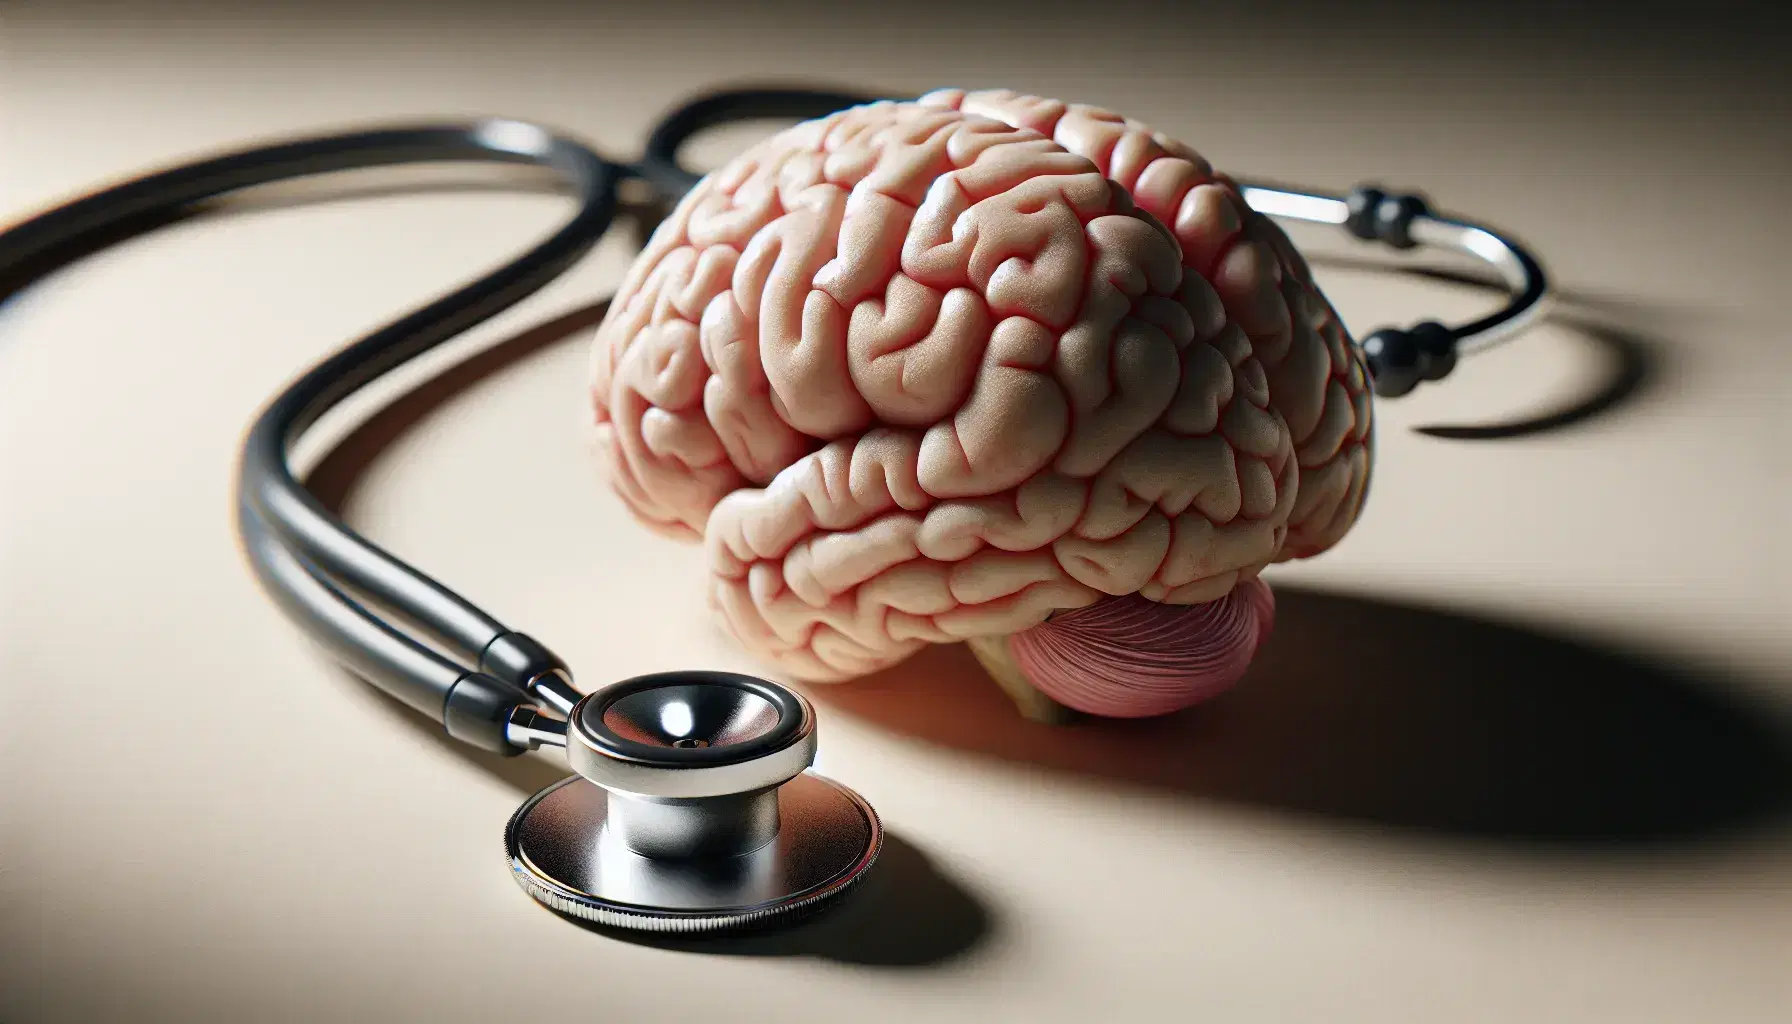 Detailed model of human brain with surface of visible sulci and gyri and black stethoscope placed on temporal lobe on neutral background.